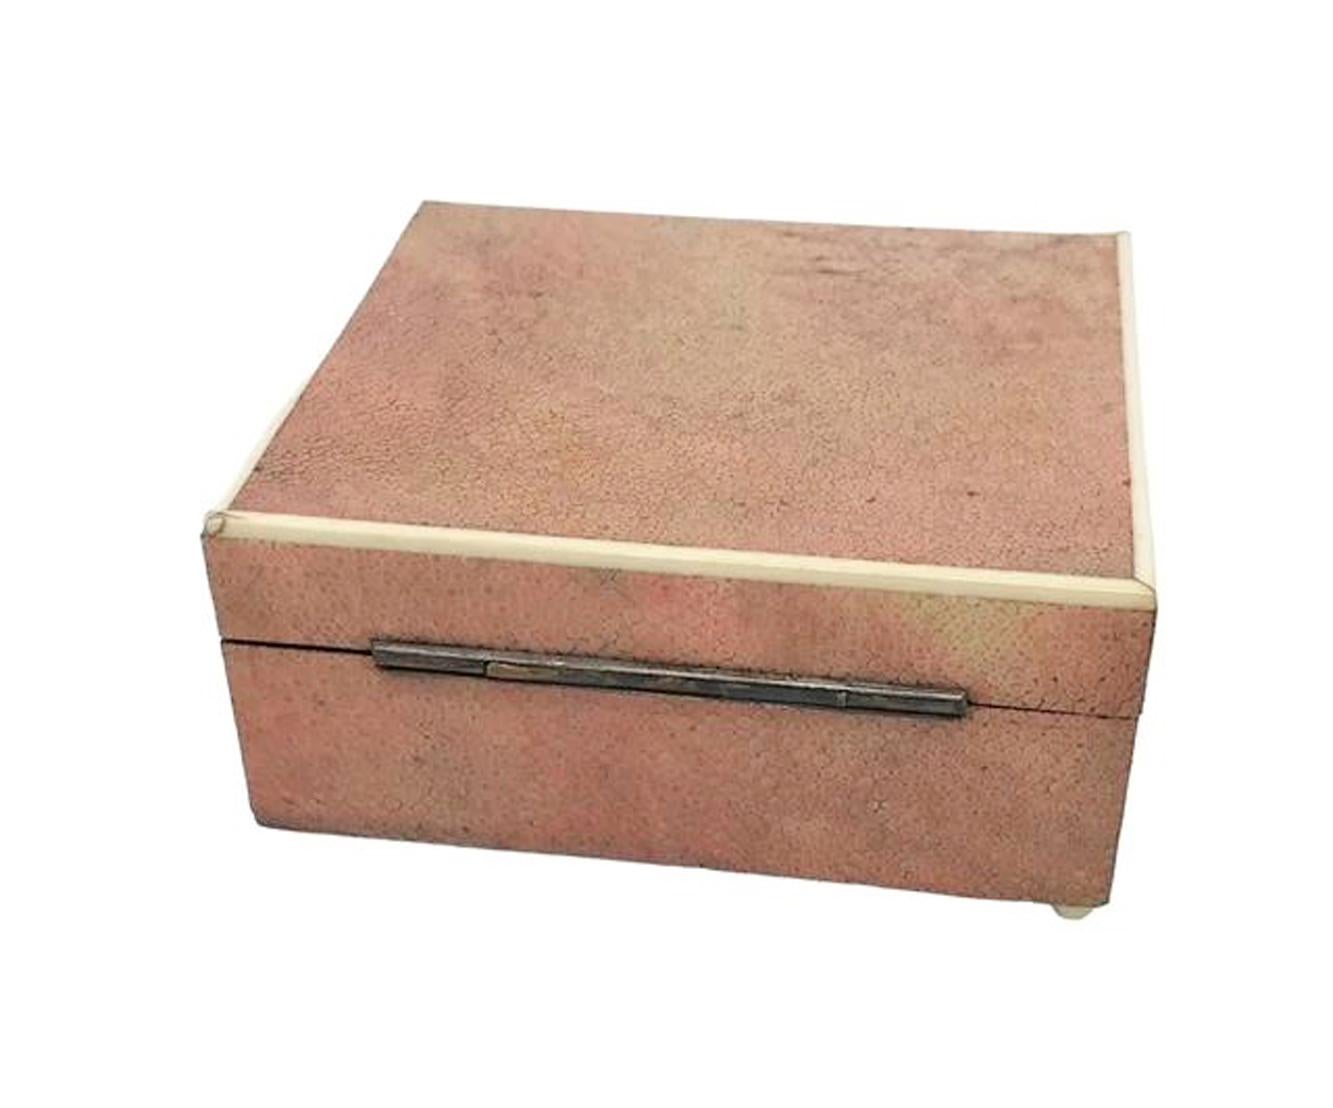 Art Deco pink shagreen covered box on ball feet and with an inset label to the bottom marked 